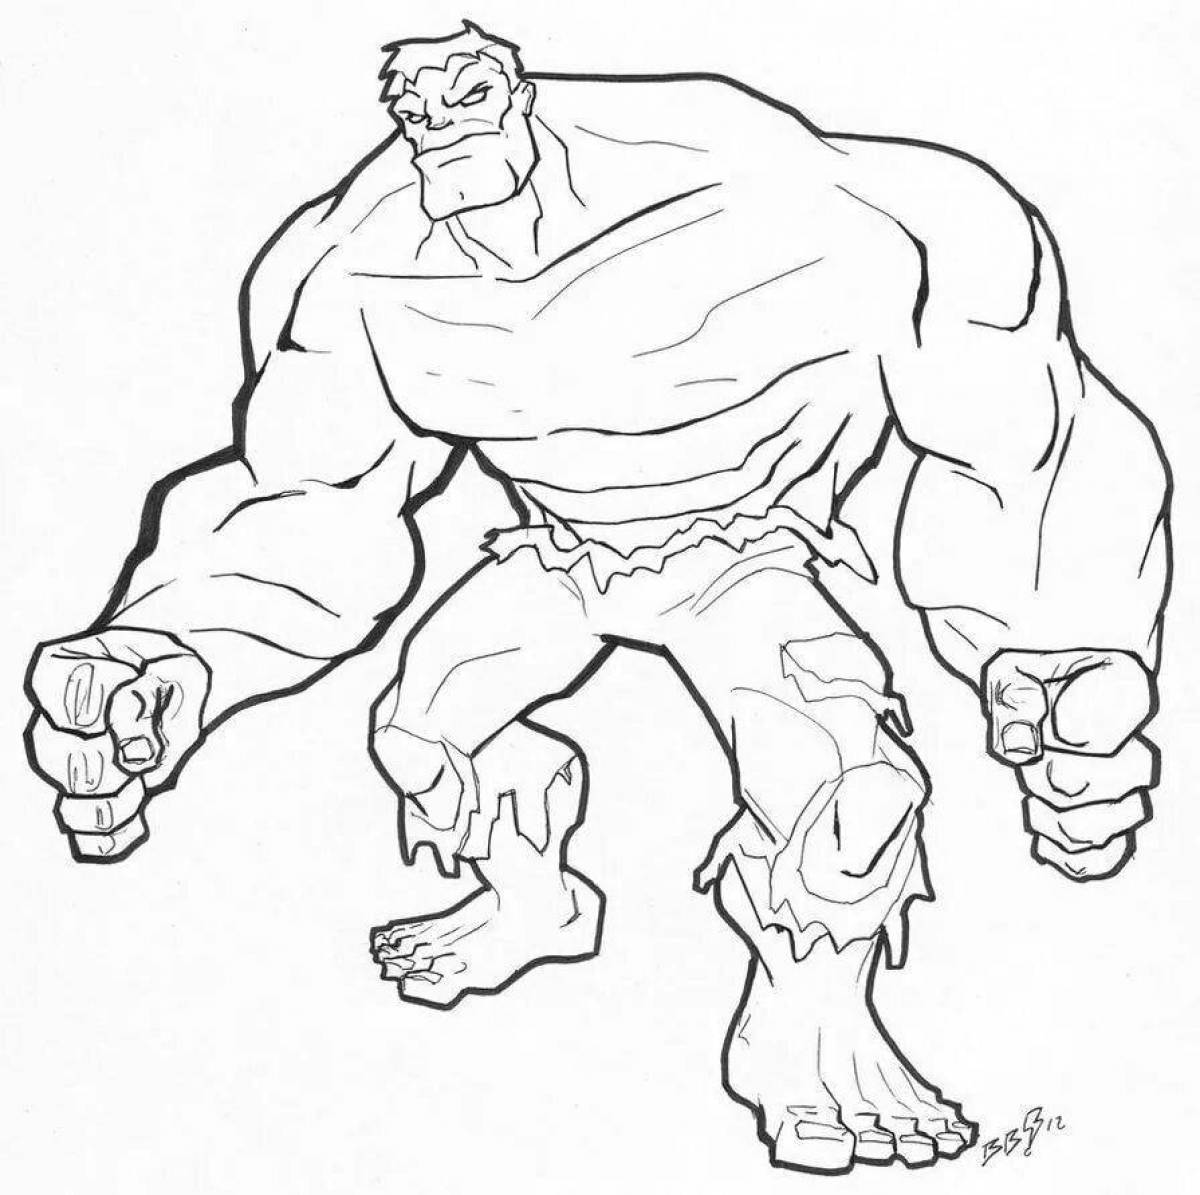 Outstanding Hulk coloring book for 6-7 year olds